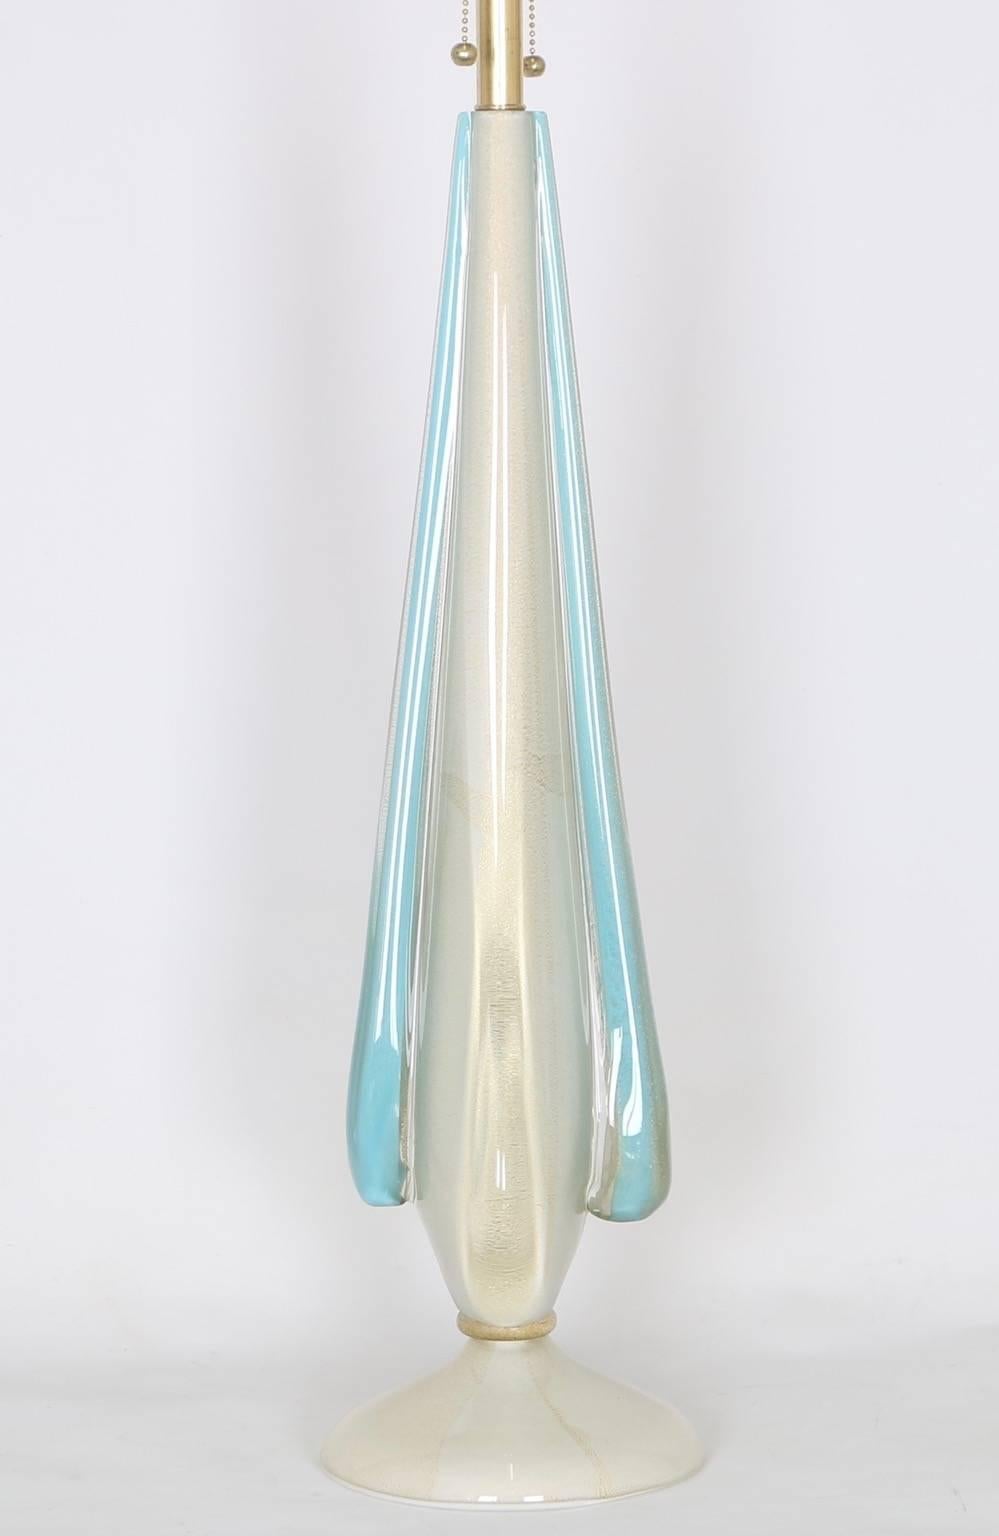 Mid-20th Century Flavio Poli for Seguso Sommerso Lamp in Blue and White with Gold Aventurine